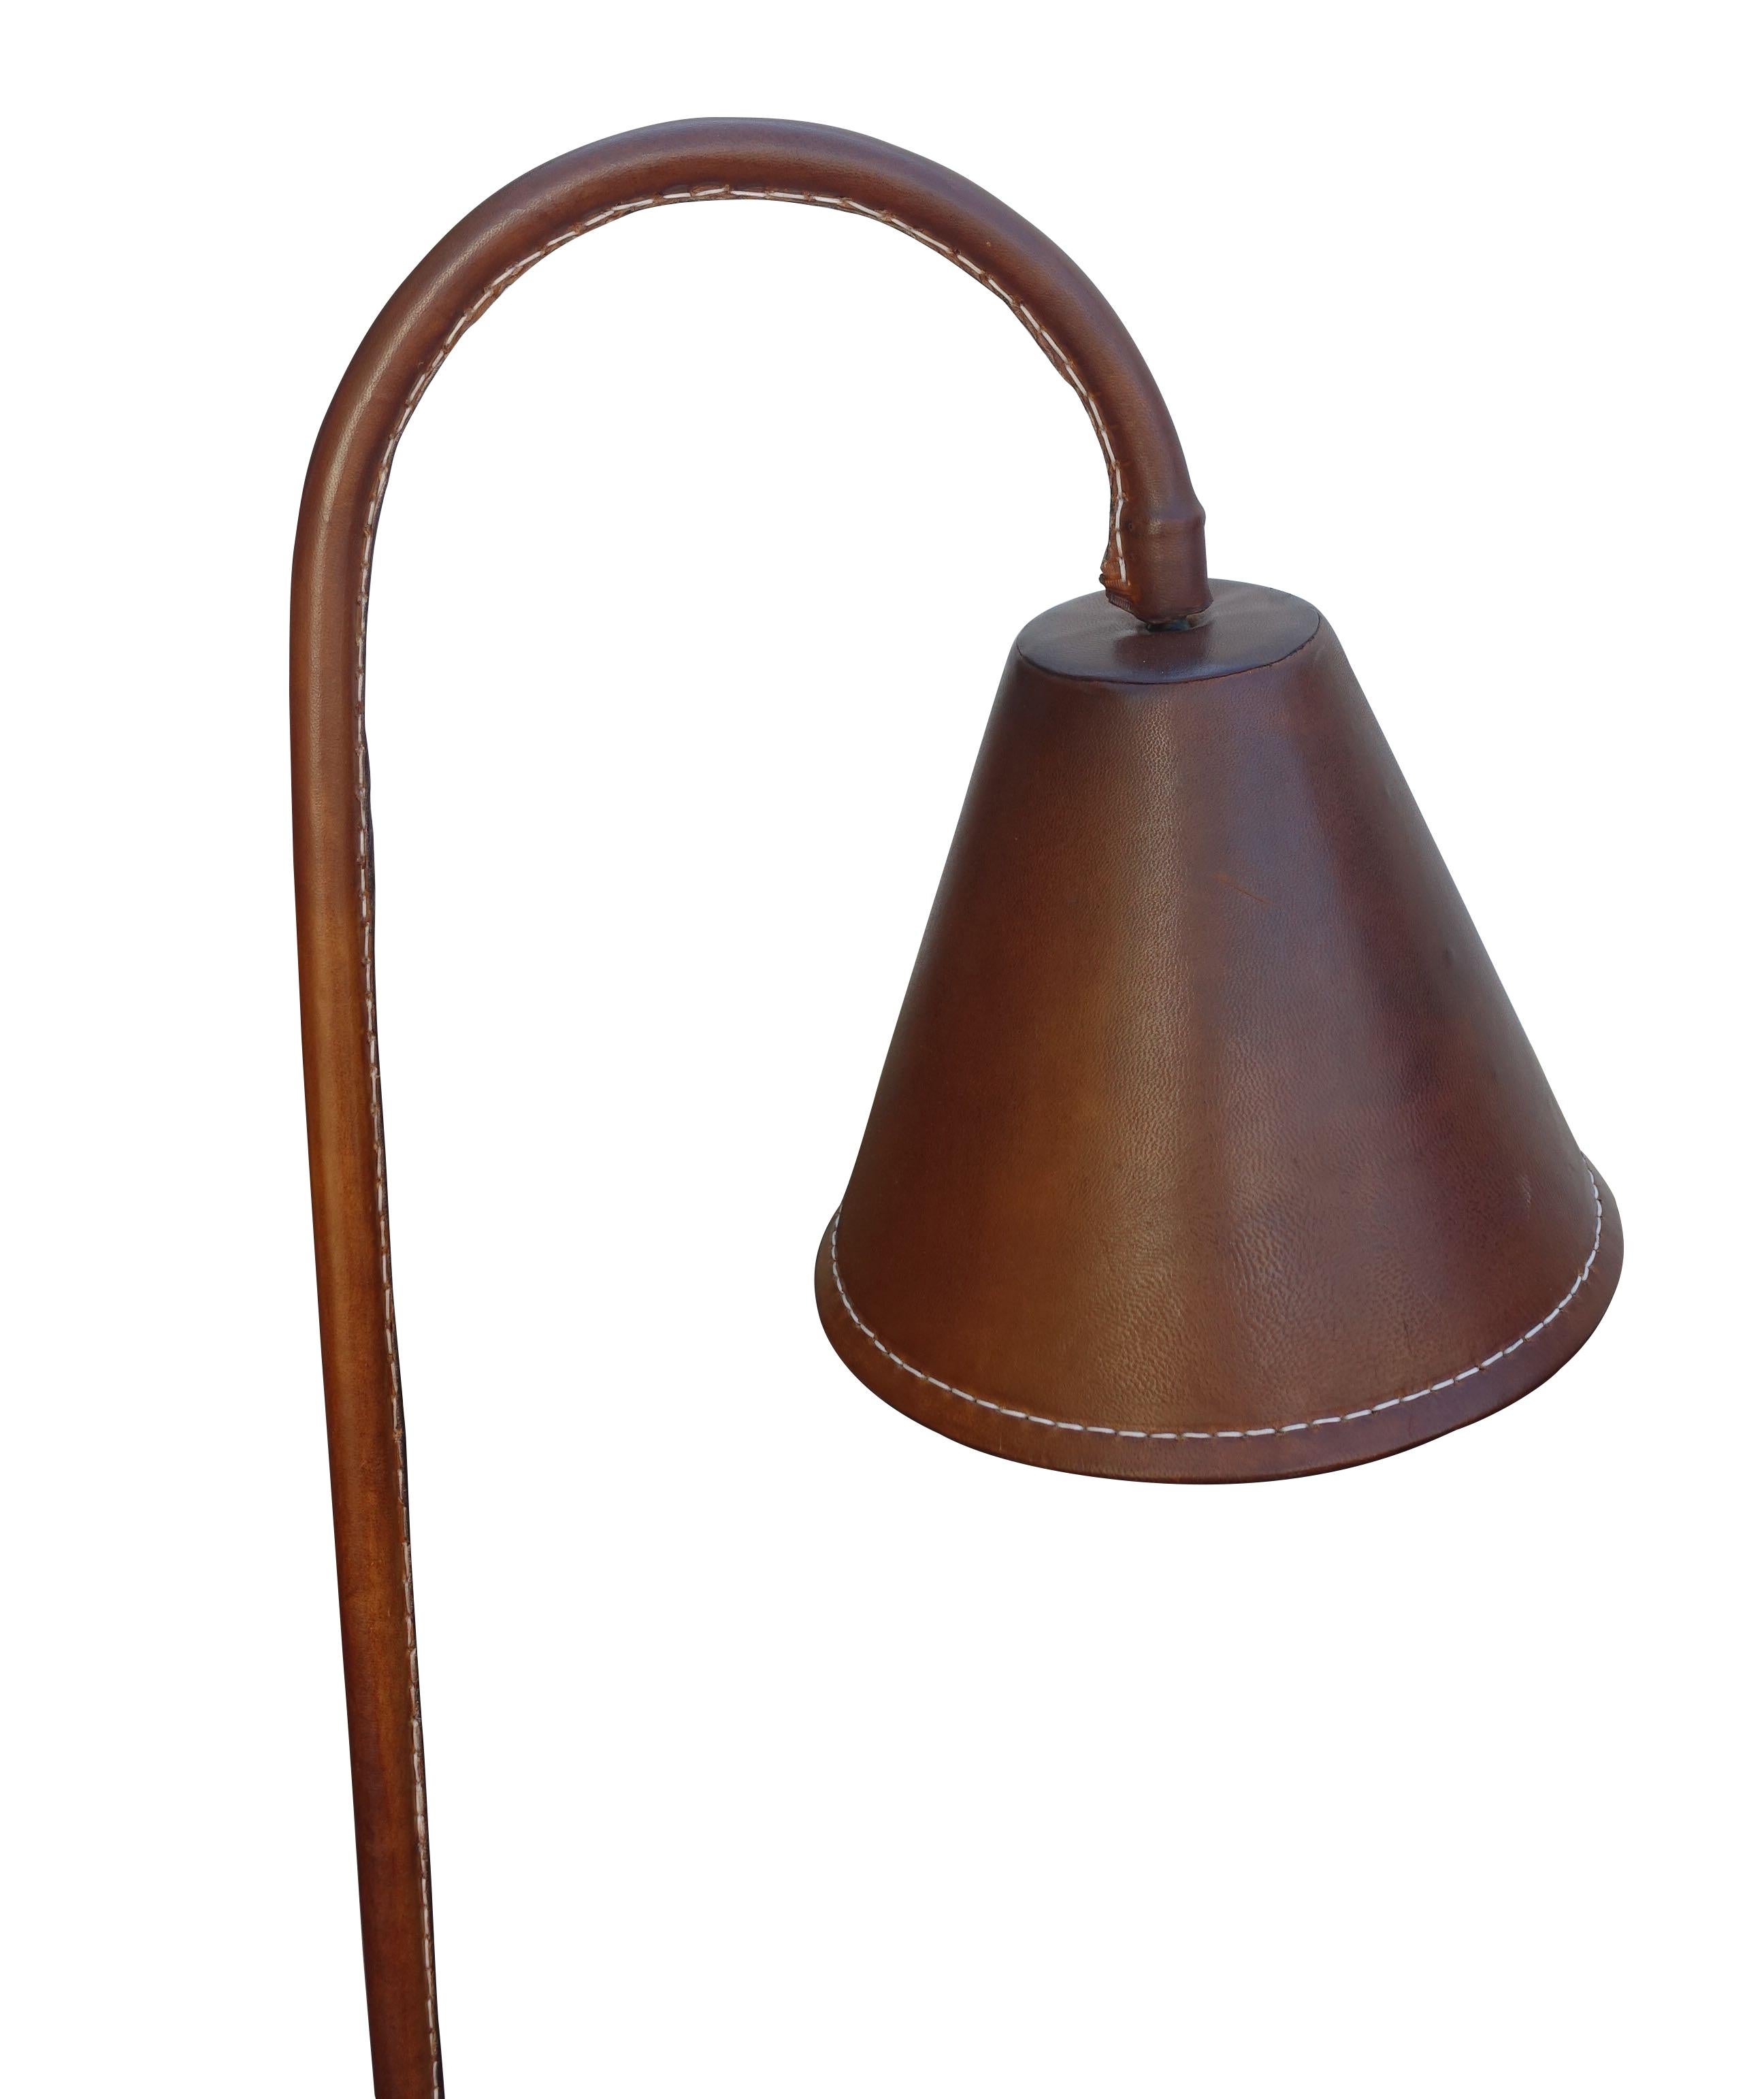 Midcentury Spanish classic Valenti style brown leather floor lamp.
Shade, base and upright all in brown leather.
Recently restored and rewired.
Measures: Shade is 9